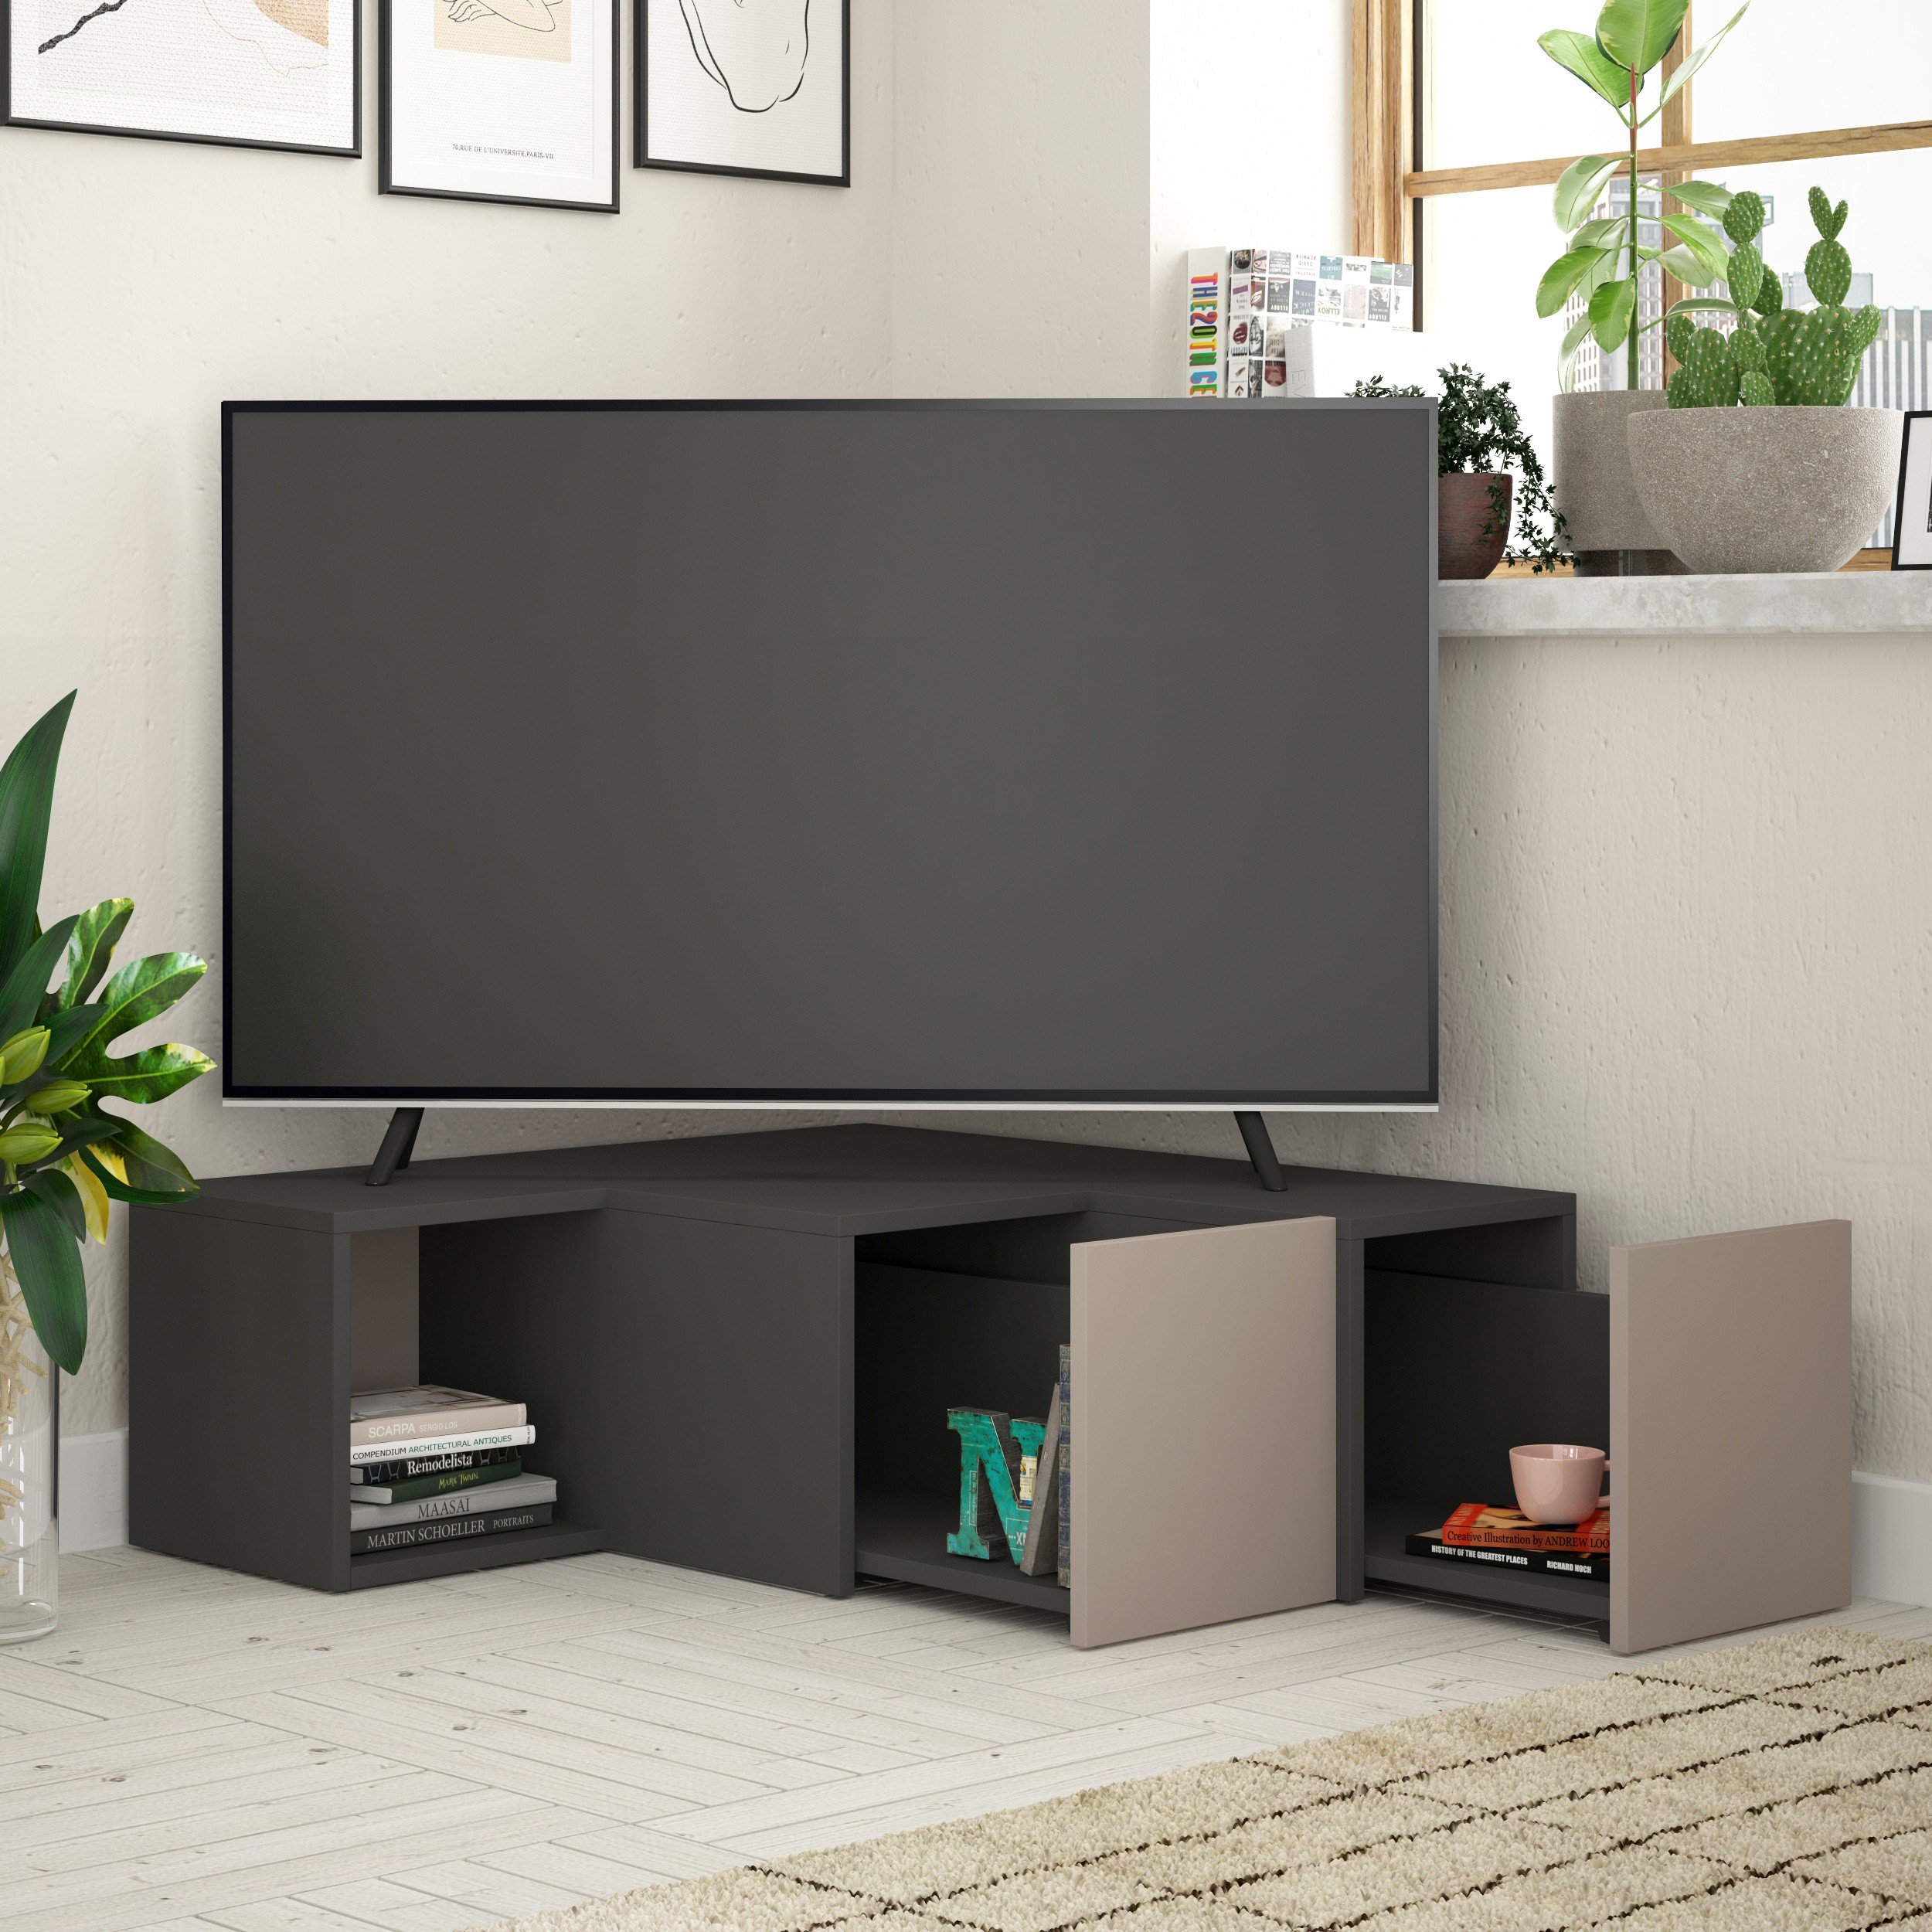 COMPACT TV STAND - ANTHRACITE - LIGHT MOCHA - M.TV.16544.4